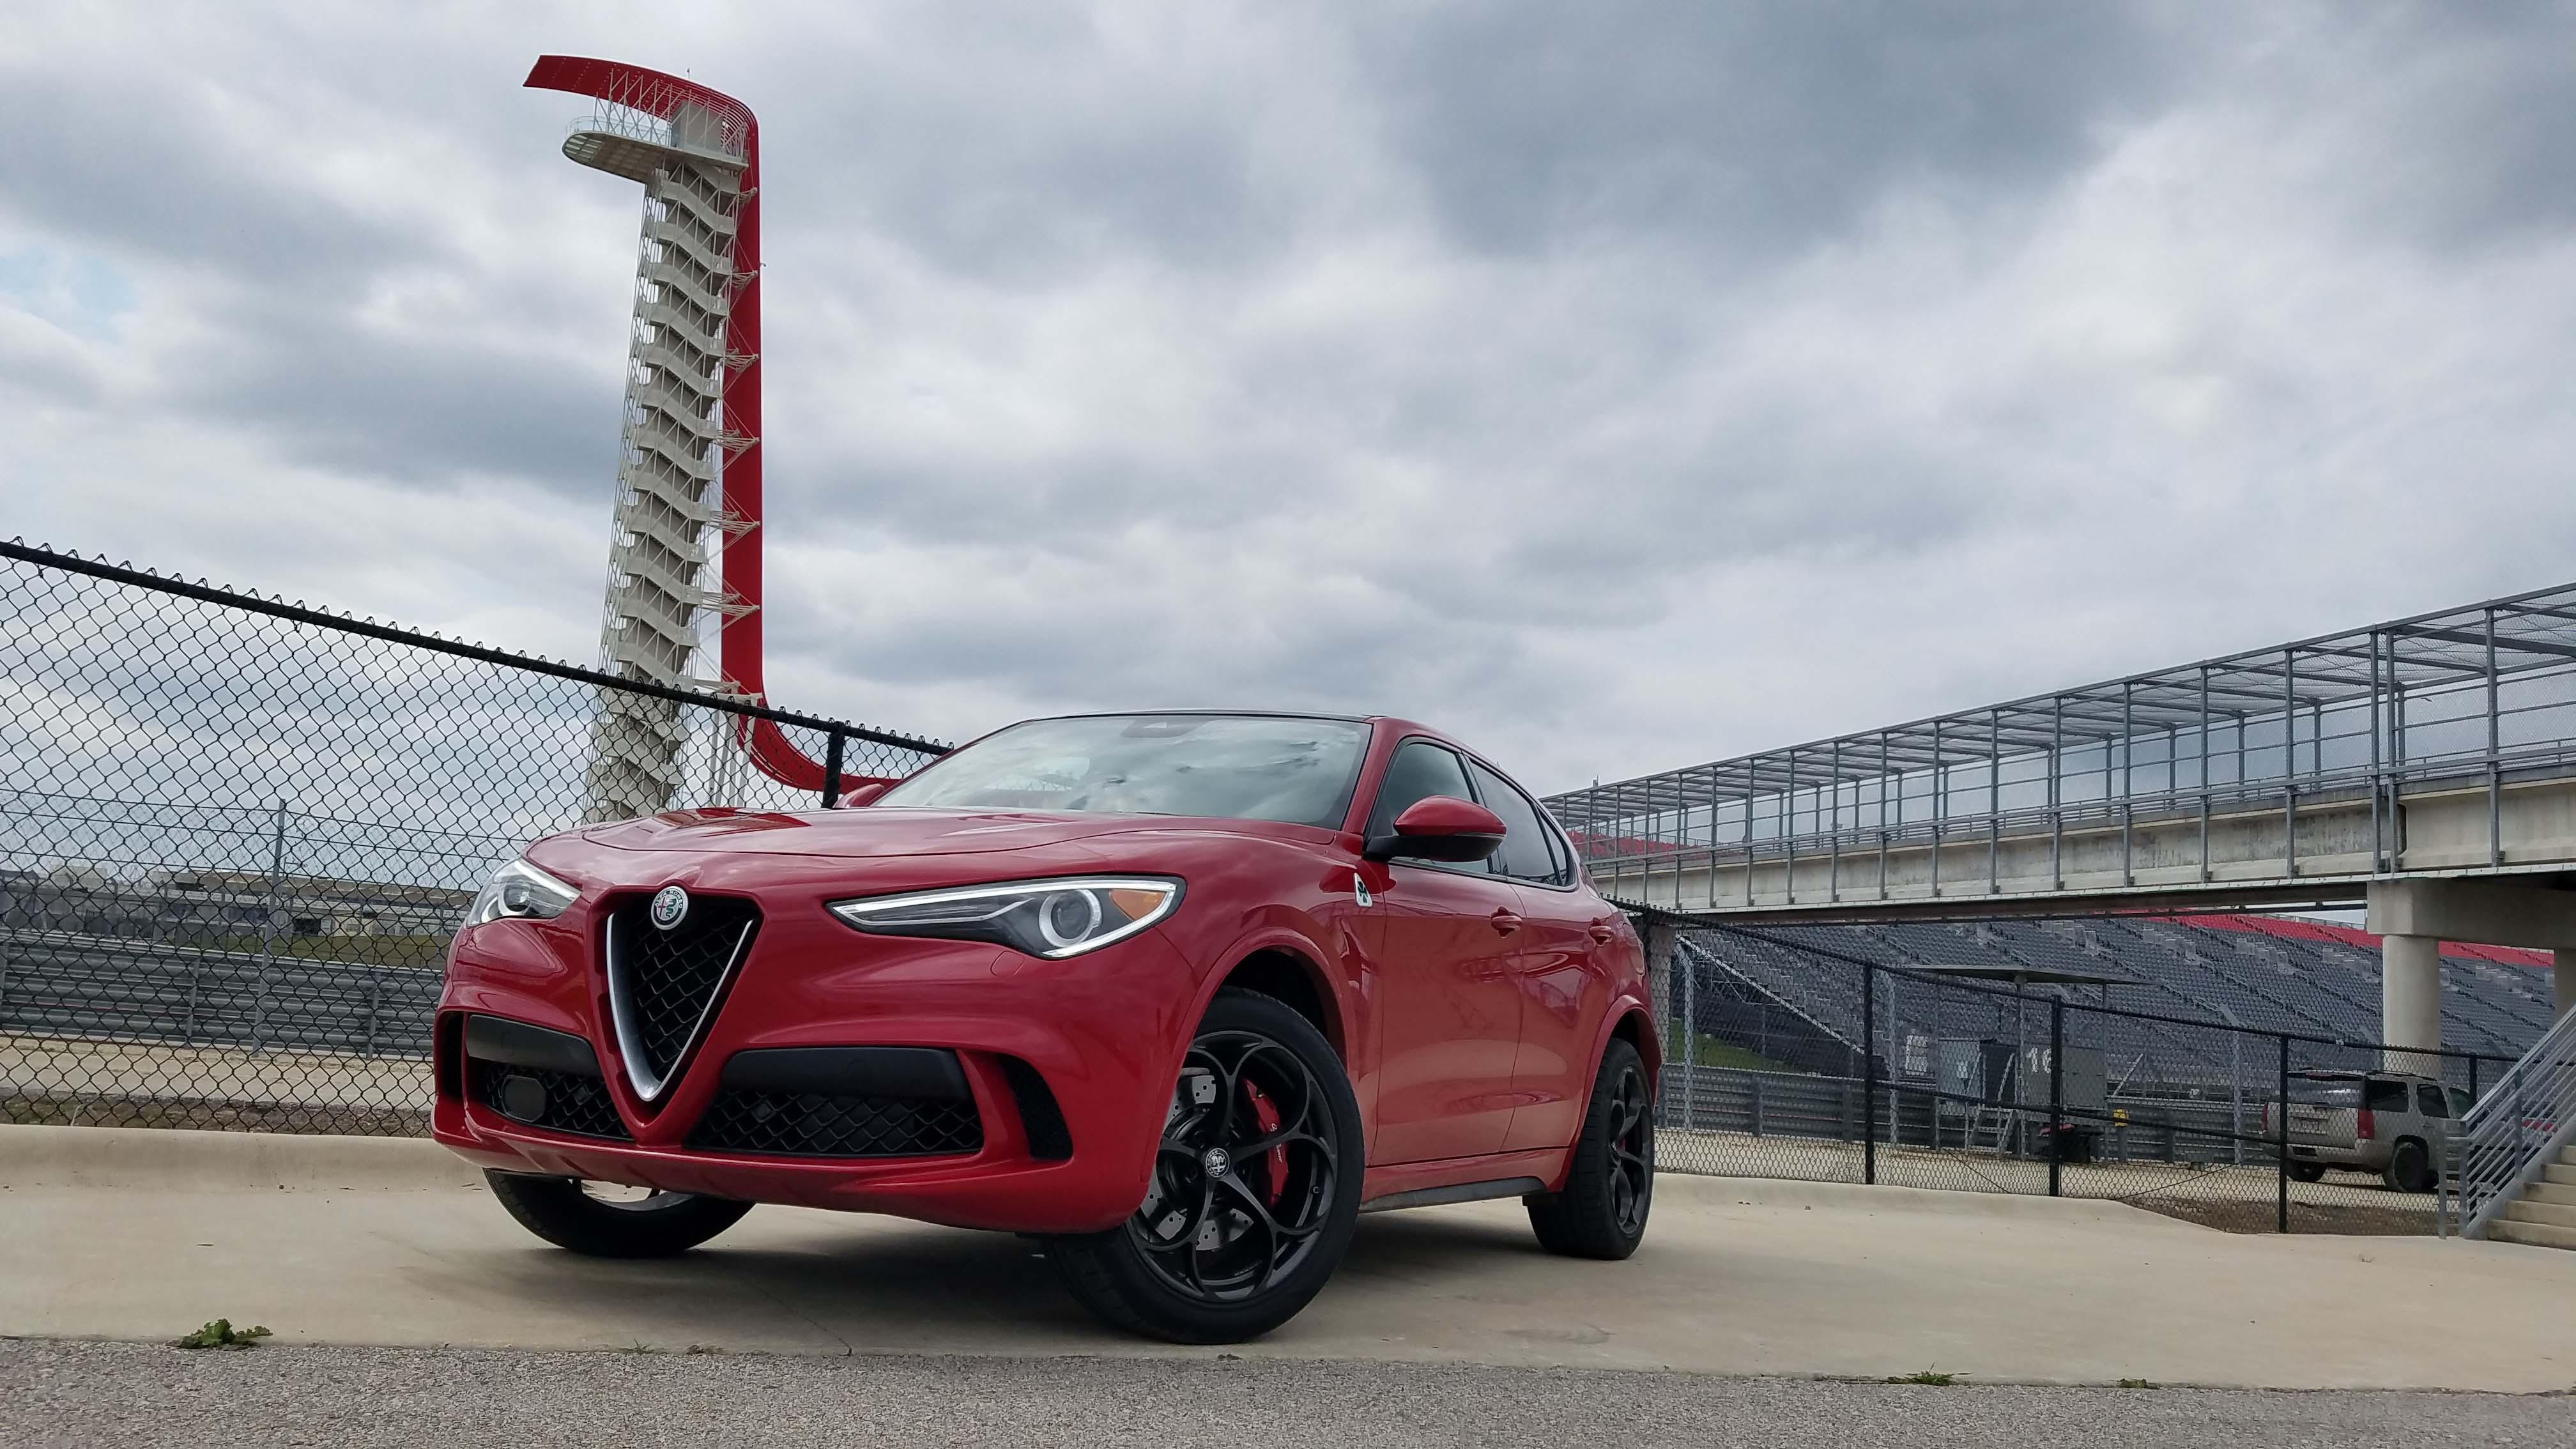 The Alfa Romeo Stelvio Quadrifoglio is the Italian automaker's third performance car in the U.S. market following the 4C sports car and Giulia Quadrifoglio. All three have set lap records in their class at Germany's Nurburgring.